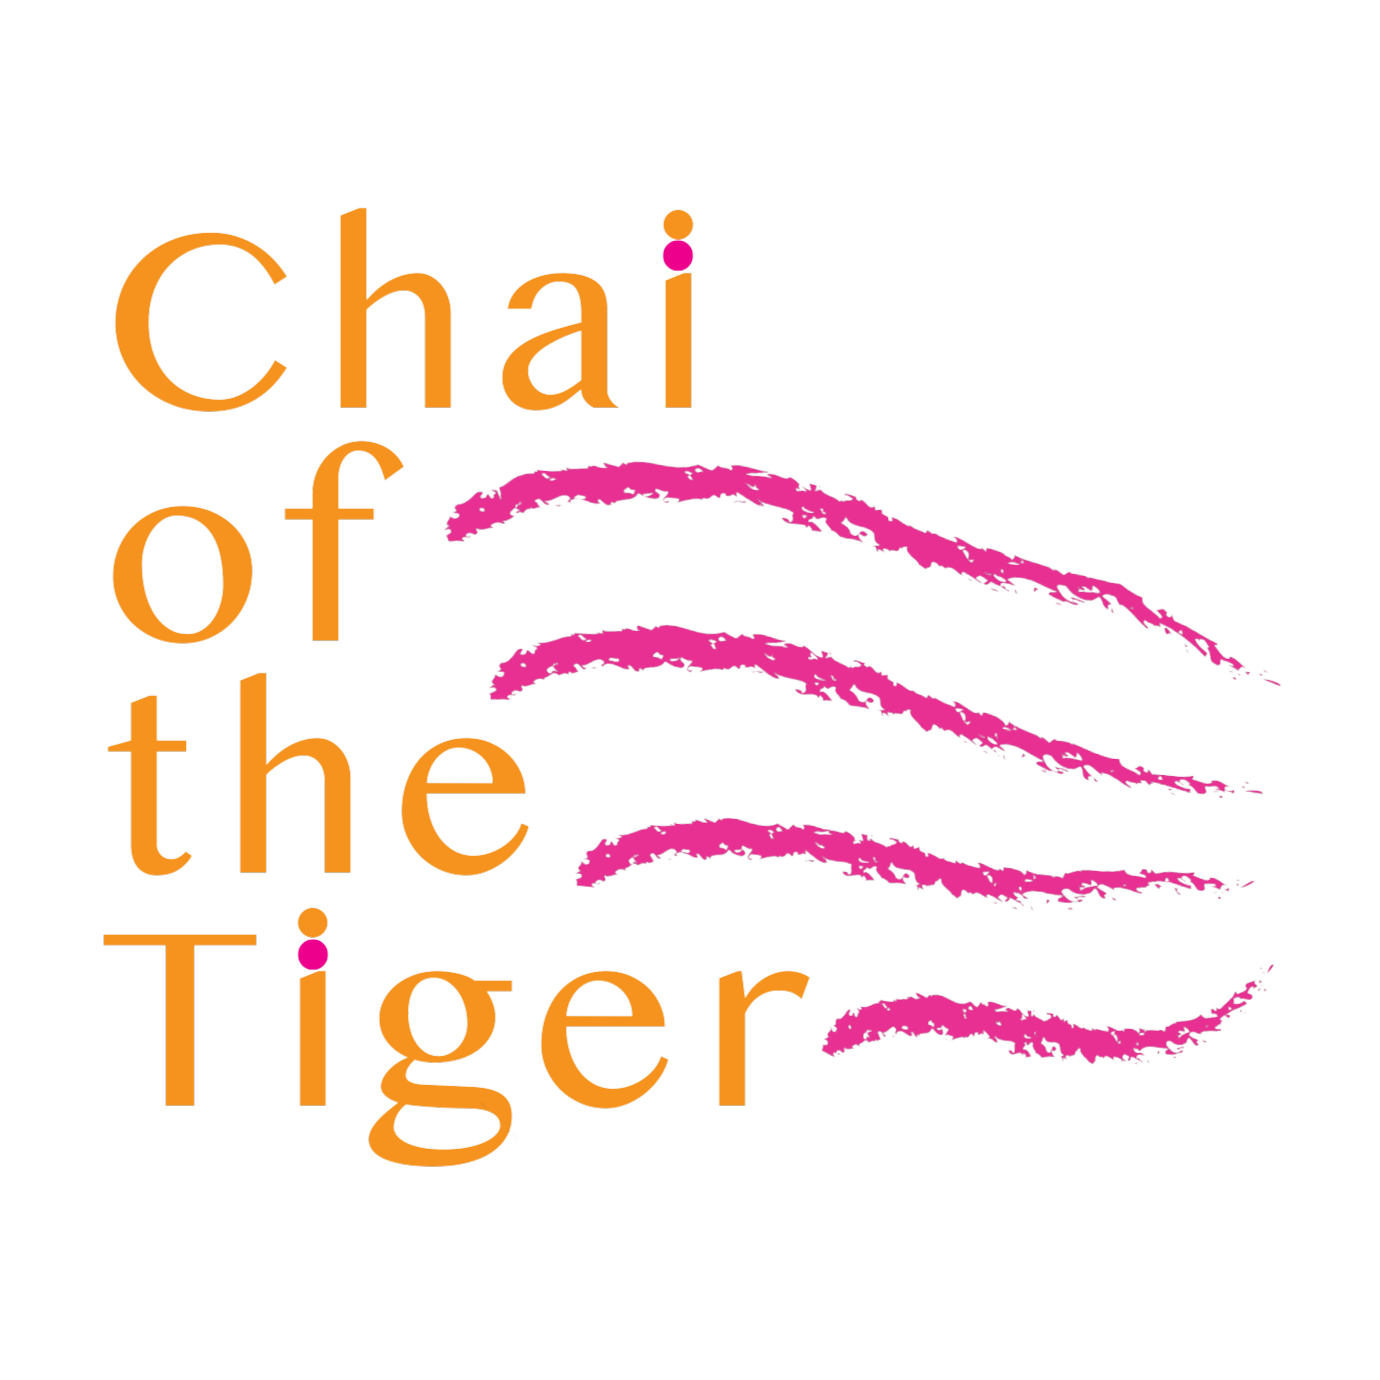 Chai of the Tiger